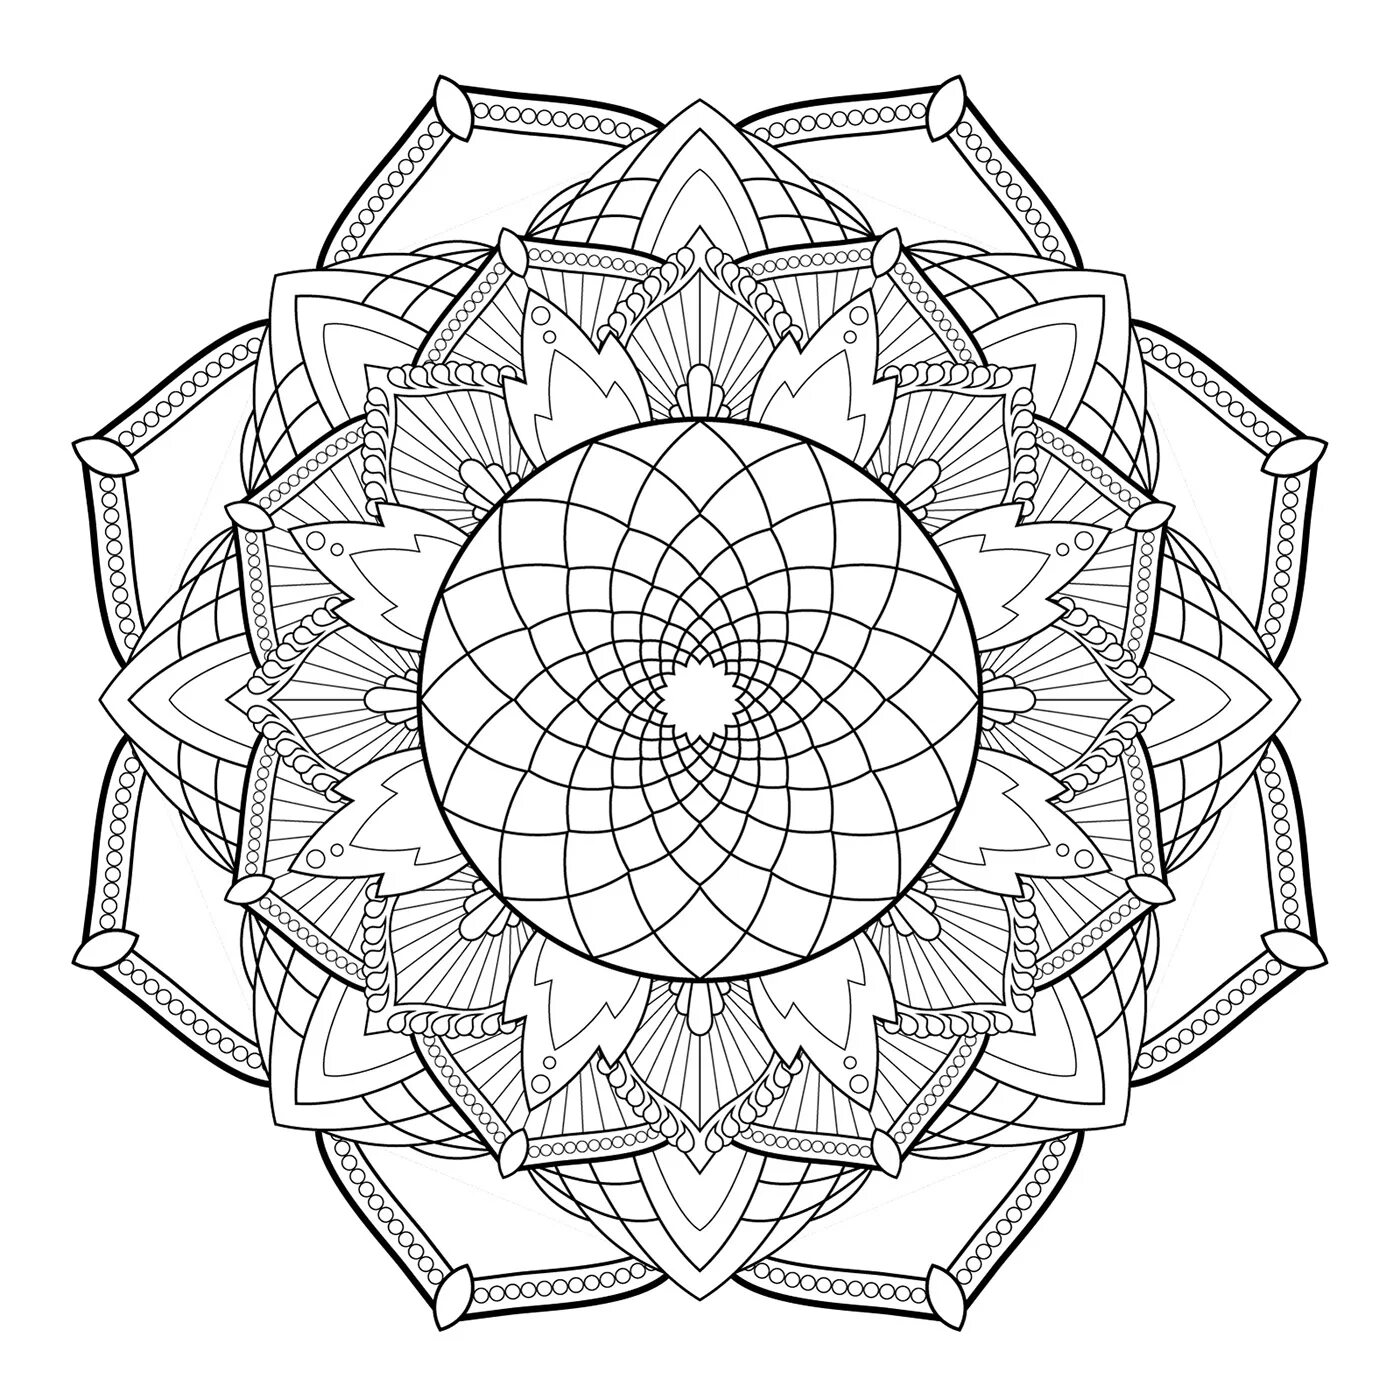 Luxury coloring mandala for luck and achievement